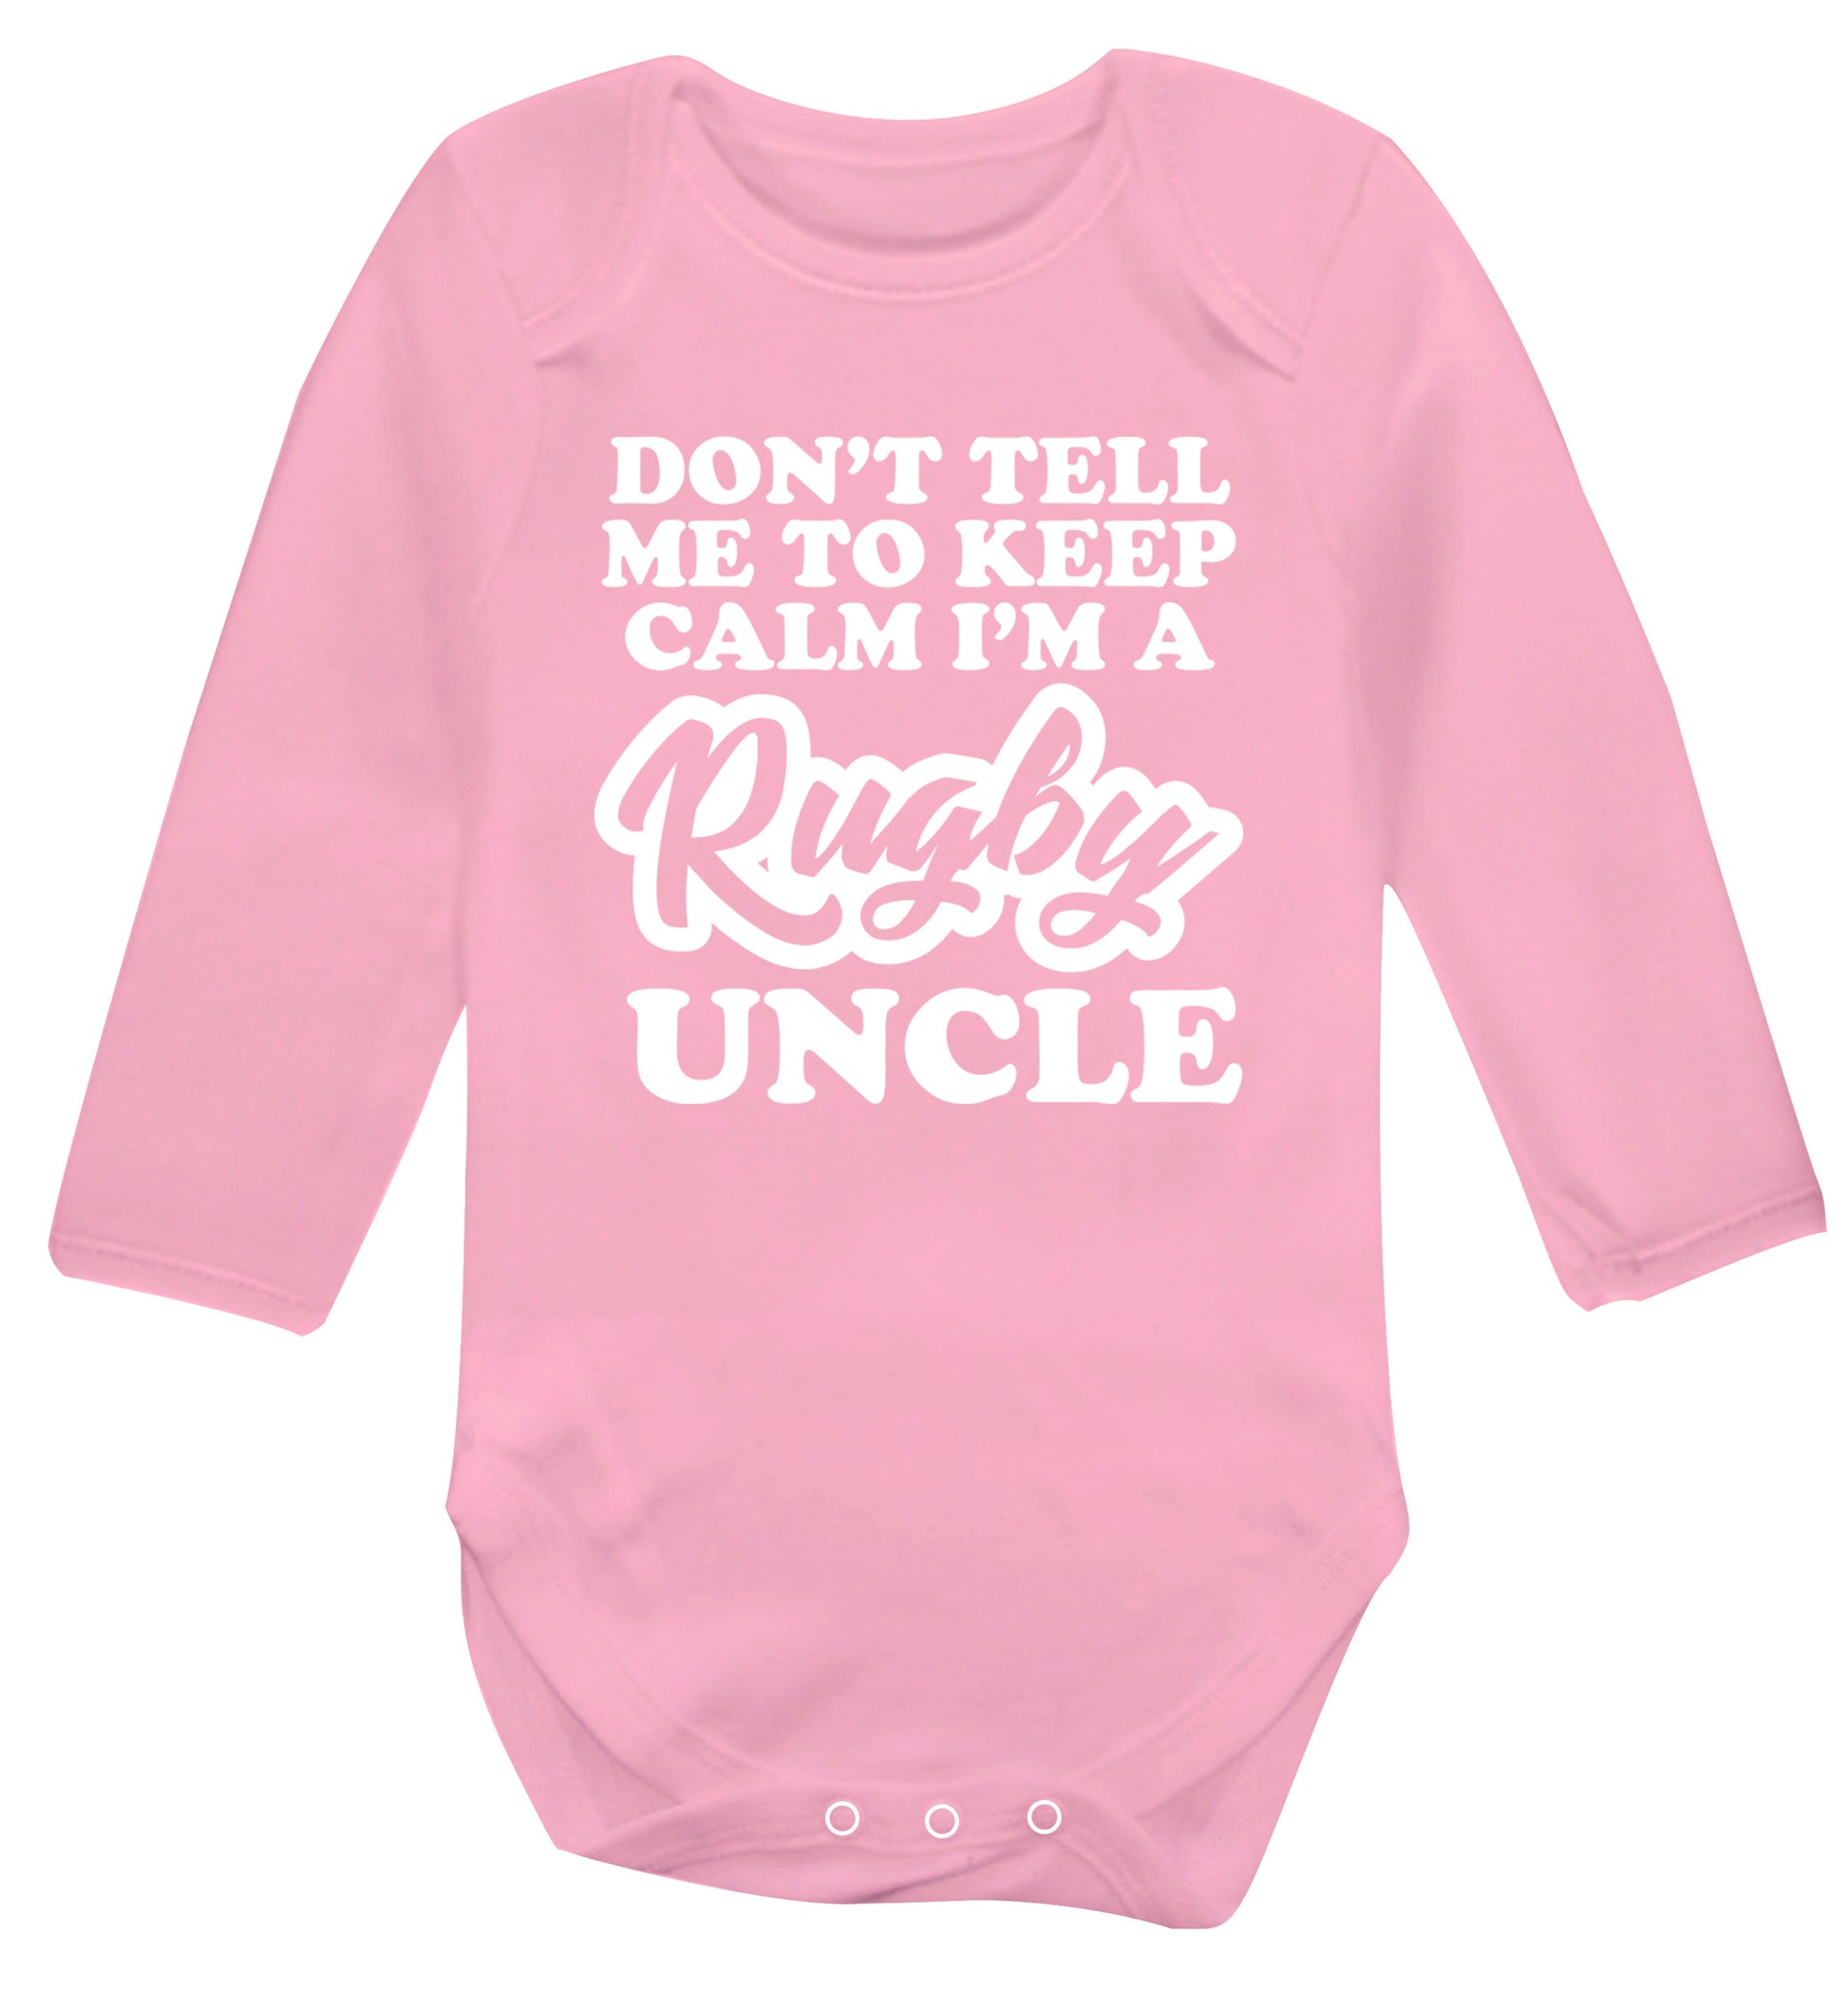 Don't tell me to keep calm I'm a rugby uncle Baby Vest long sleeved pale pink 6-12 months